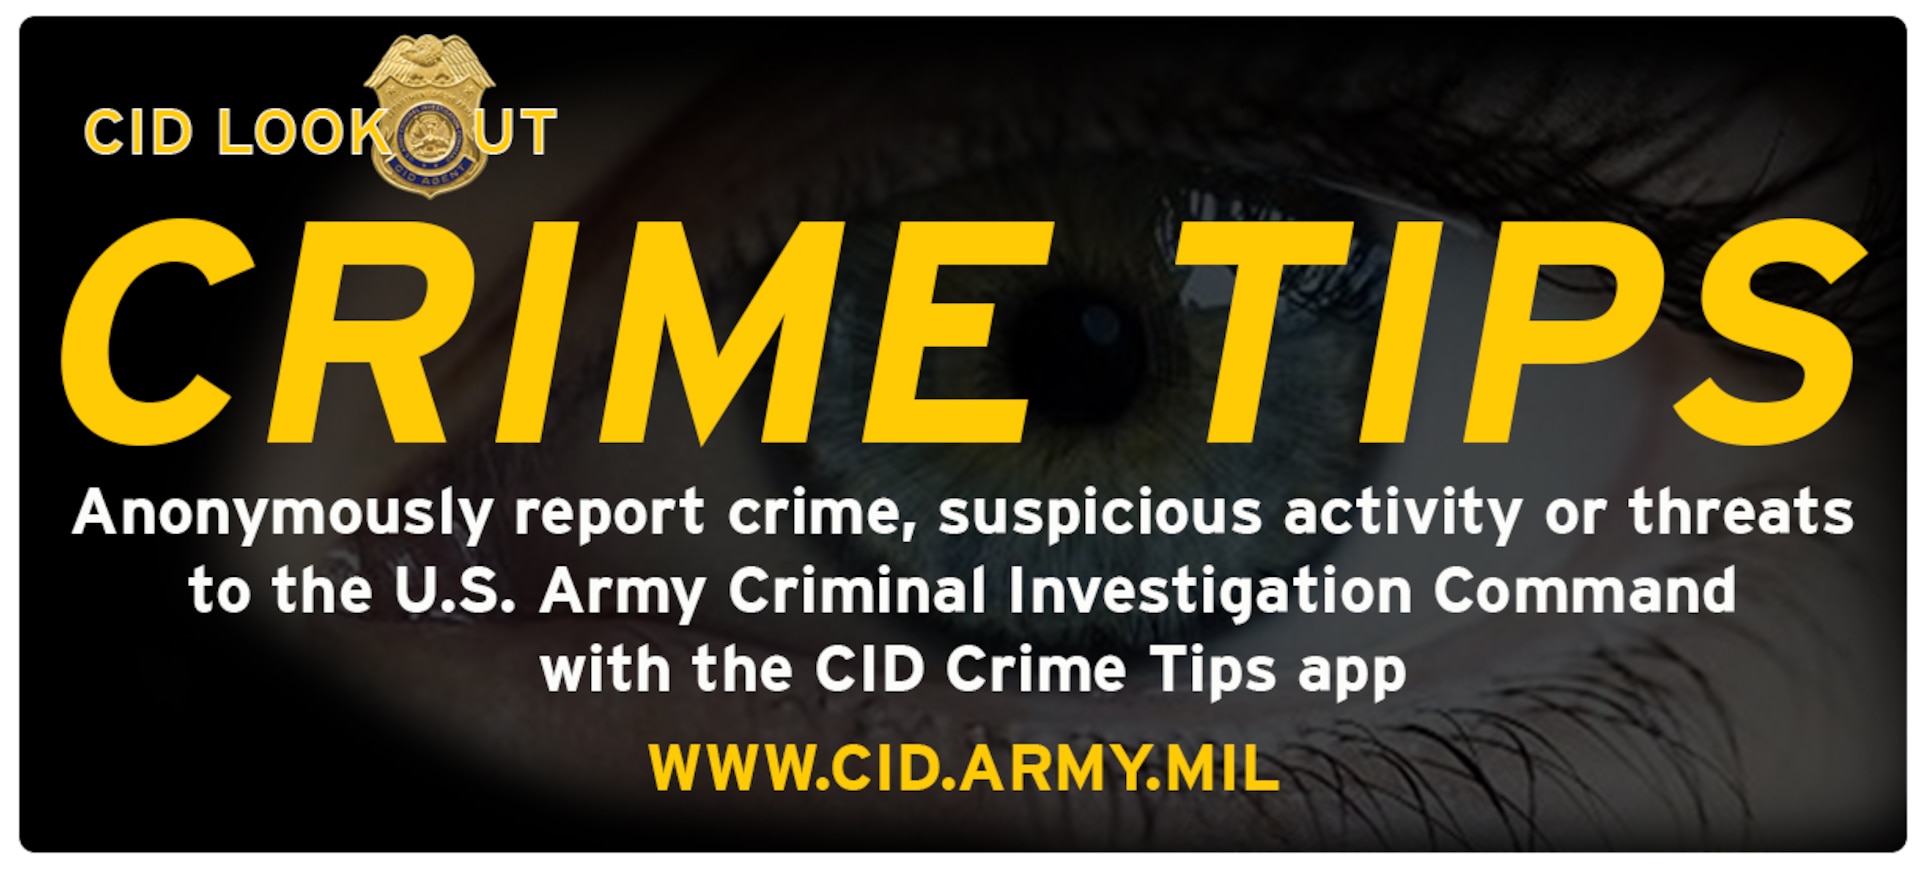 The U.S. Army Criminal Investigation Command launched a new digital Crime Tips system that is now accessible via the web or through a smartphone app. You now have the ability to use your computer, smartphone, or any internet connected device to anonymously submit crime tips or report suspicious activity to CID. Tips can be submitted via the web at www.cid.army.mil. You can download the app at http://www.p3tips.com/app.aspx?ID=325.